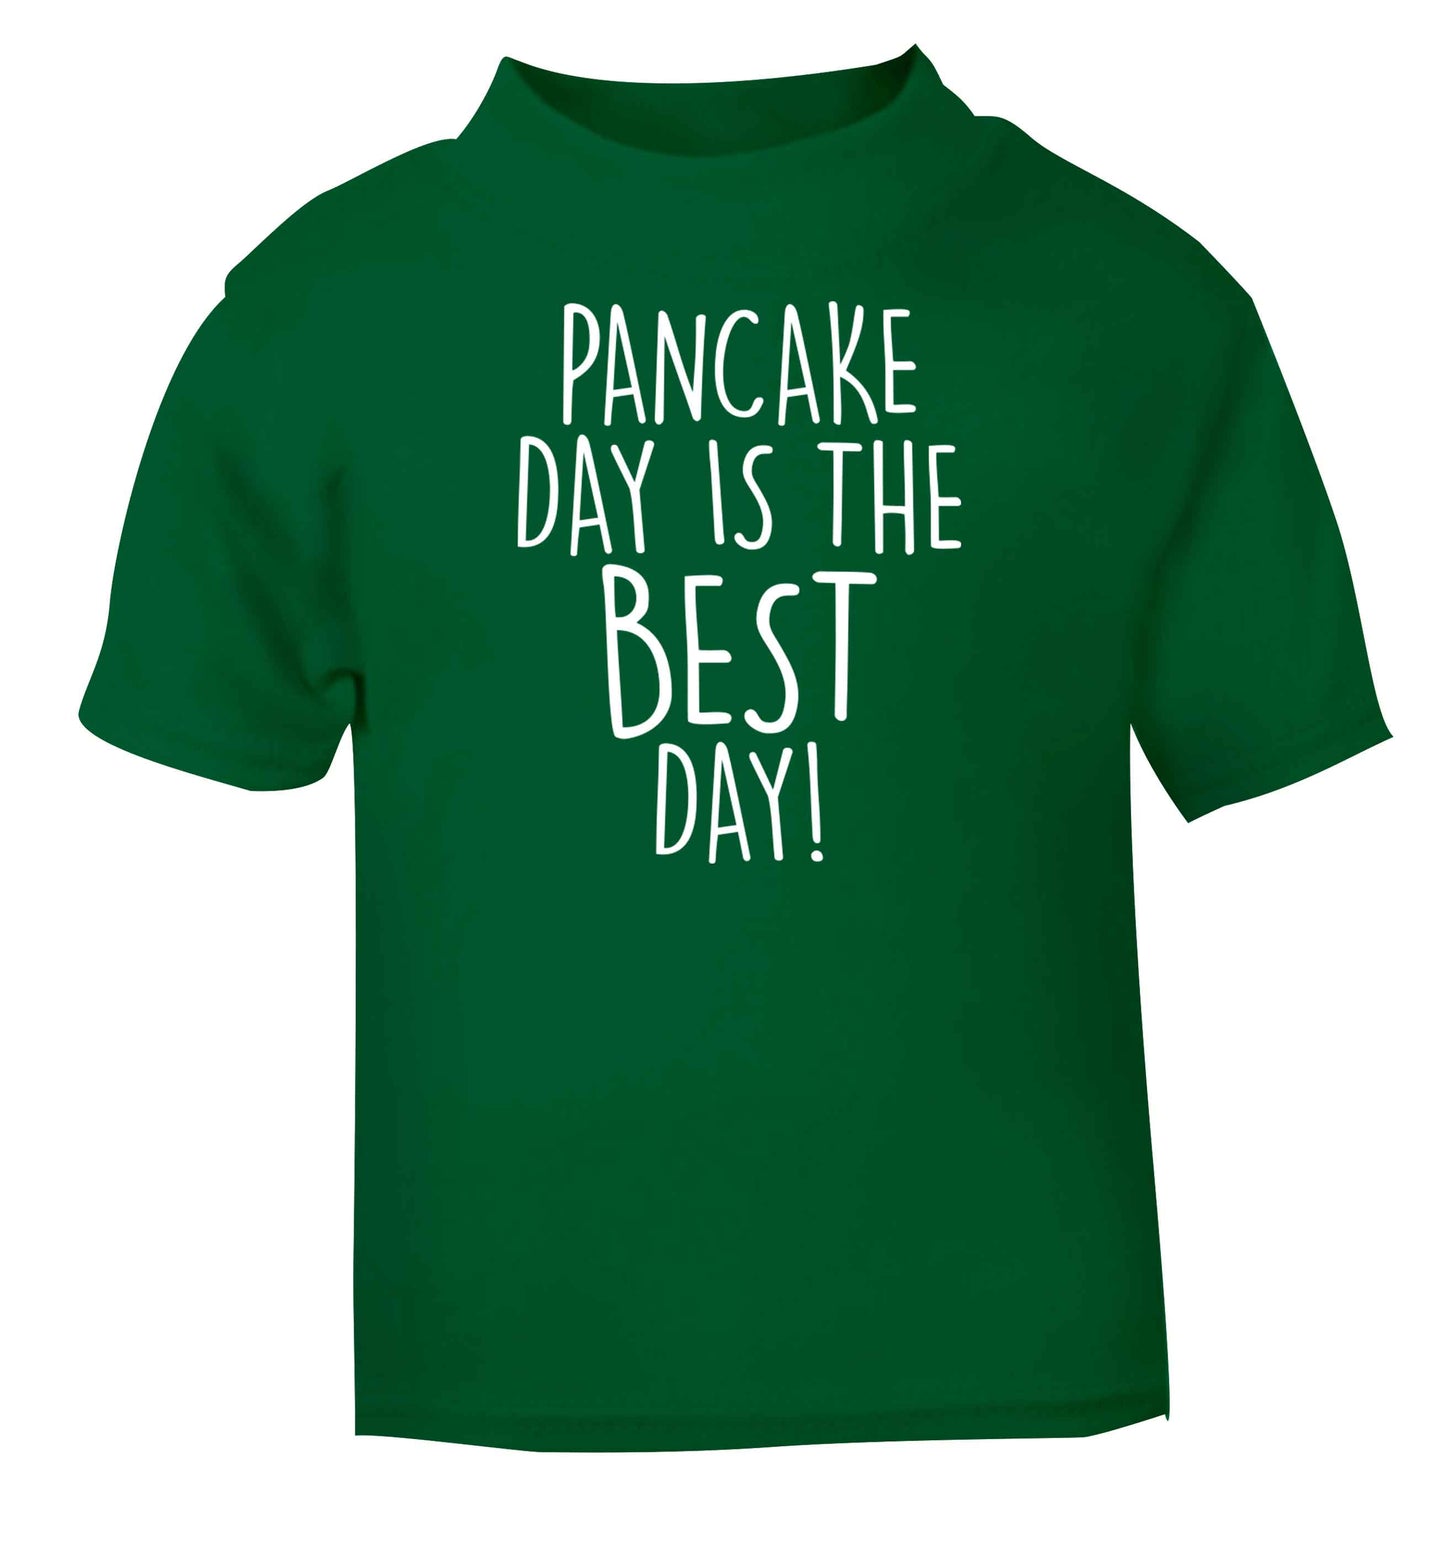 Pancake day is the best day green baby toddler Tshirt 2 Years